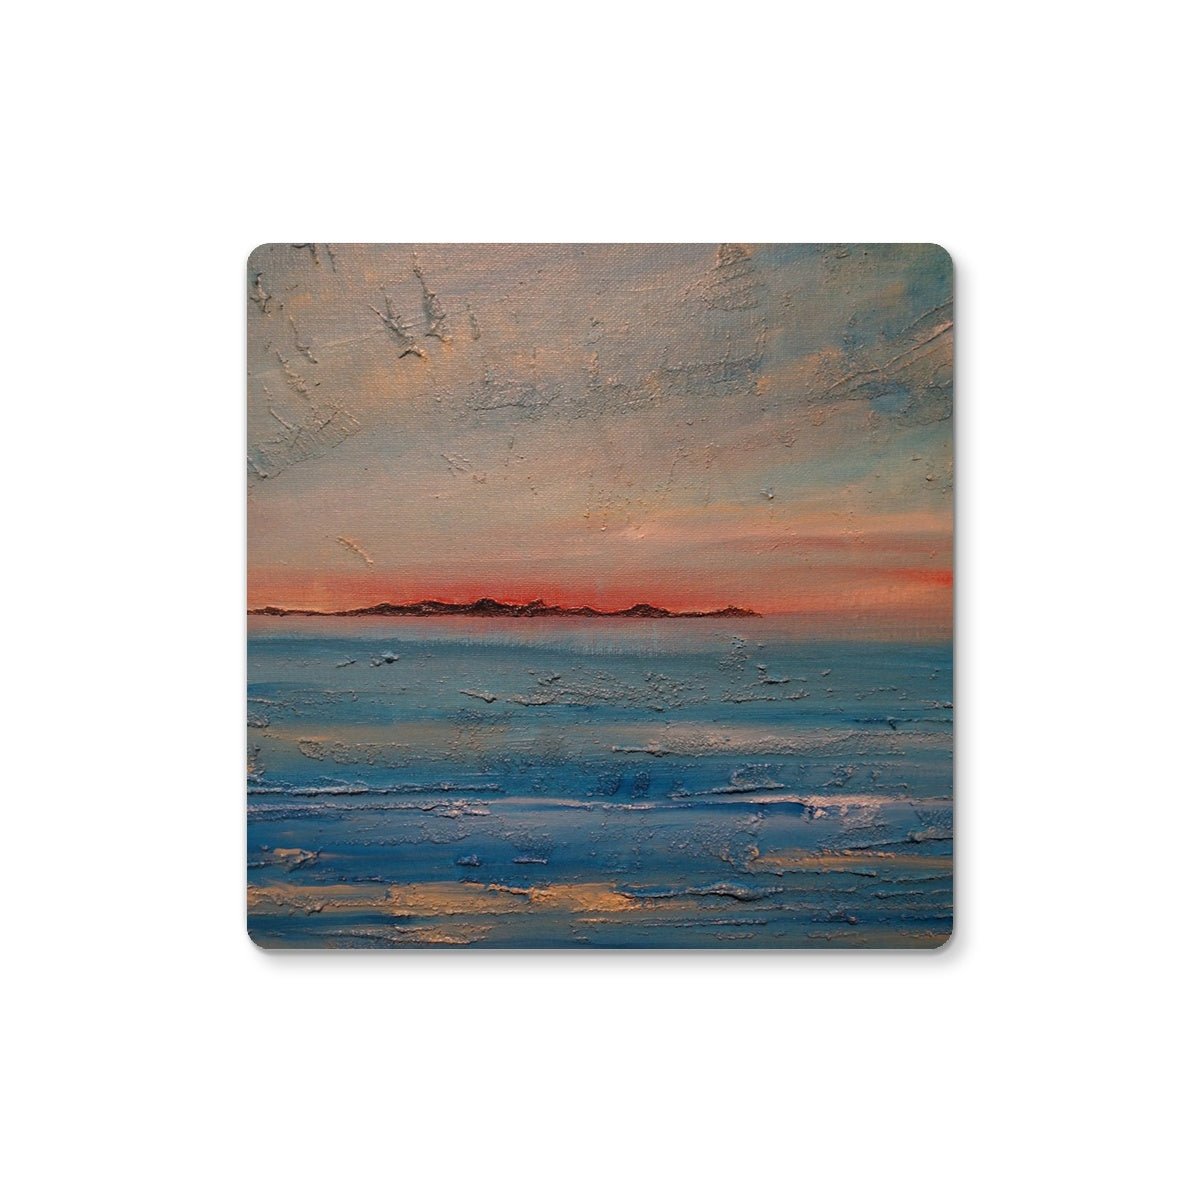 Gigha Sunset Art Gifts Coaster-Coasters-Hebridean Islands Art Gallery-4 Coasters-Paintings, Prints, Homeware, Art Gifts From Scotland By Scottish Artist Kevin Hunter